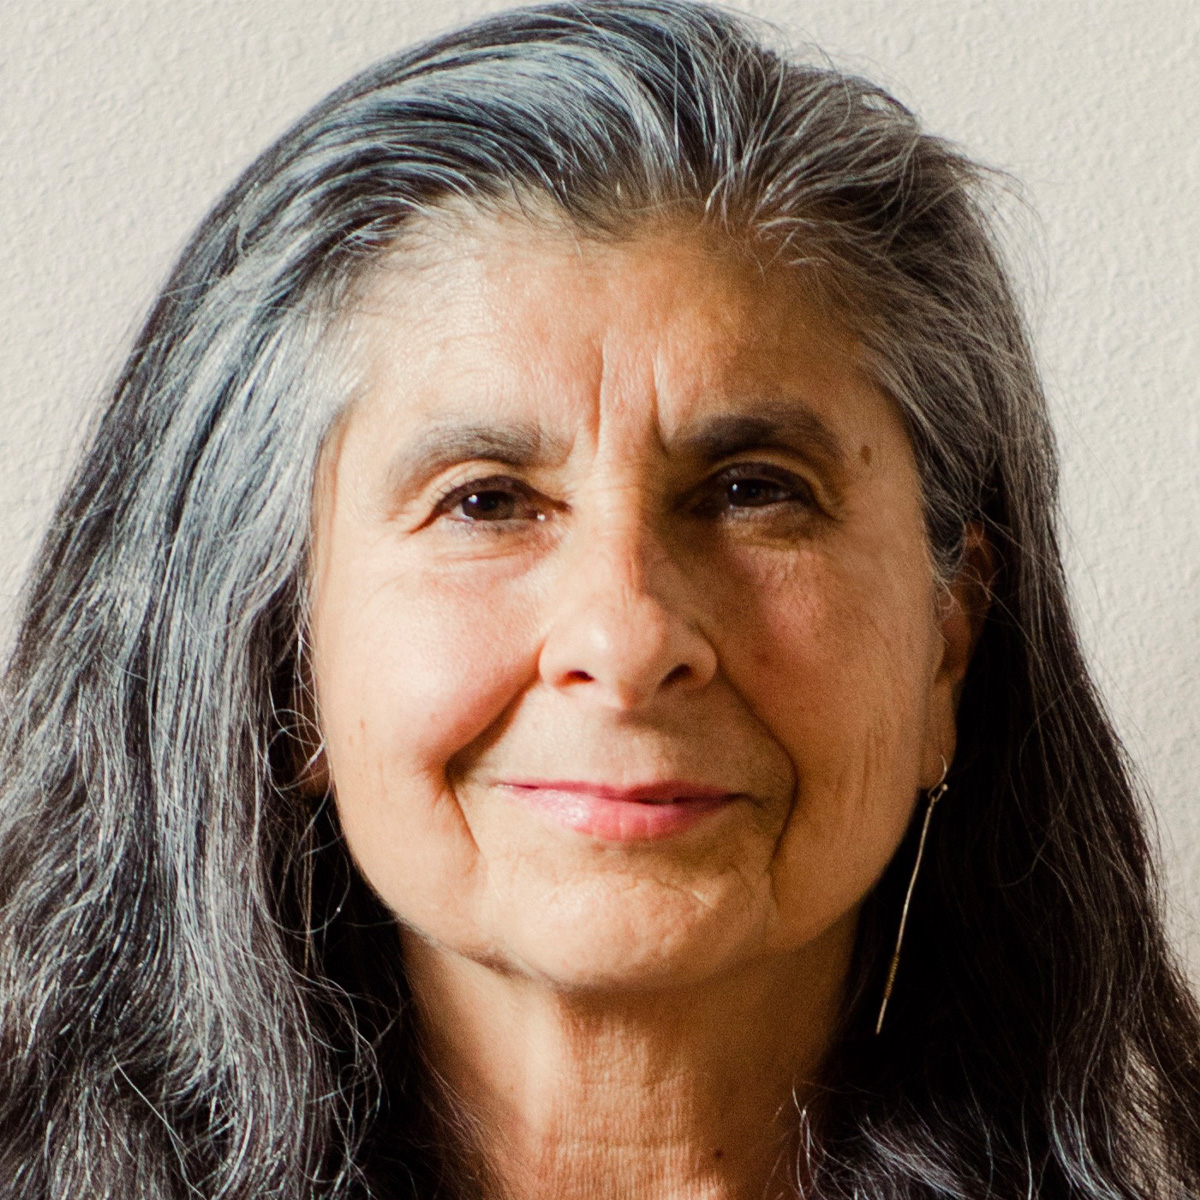 Susan Aposhyan color portrait. Susan is an older woman with long, silver and dark-colored hair. She is smiling in this posed photo.